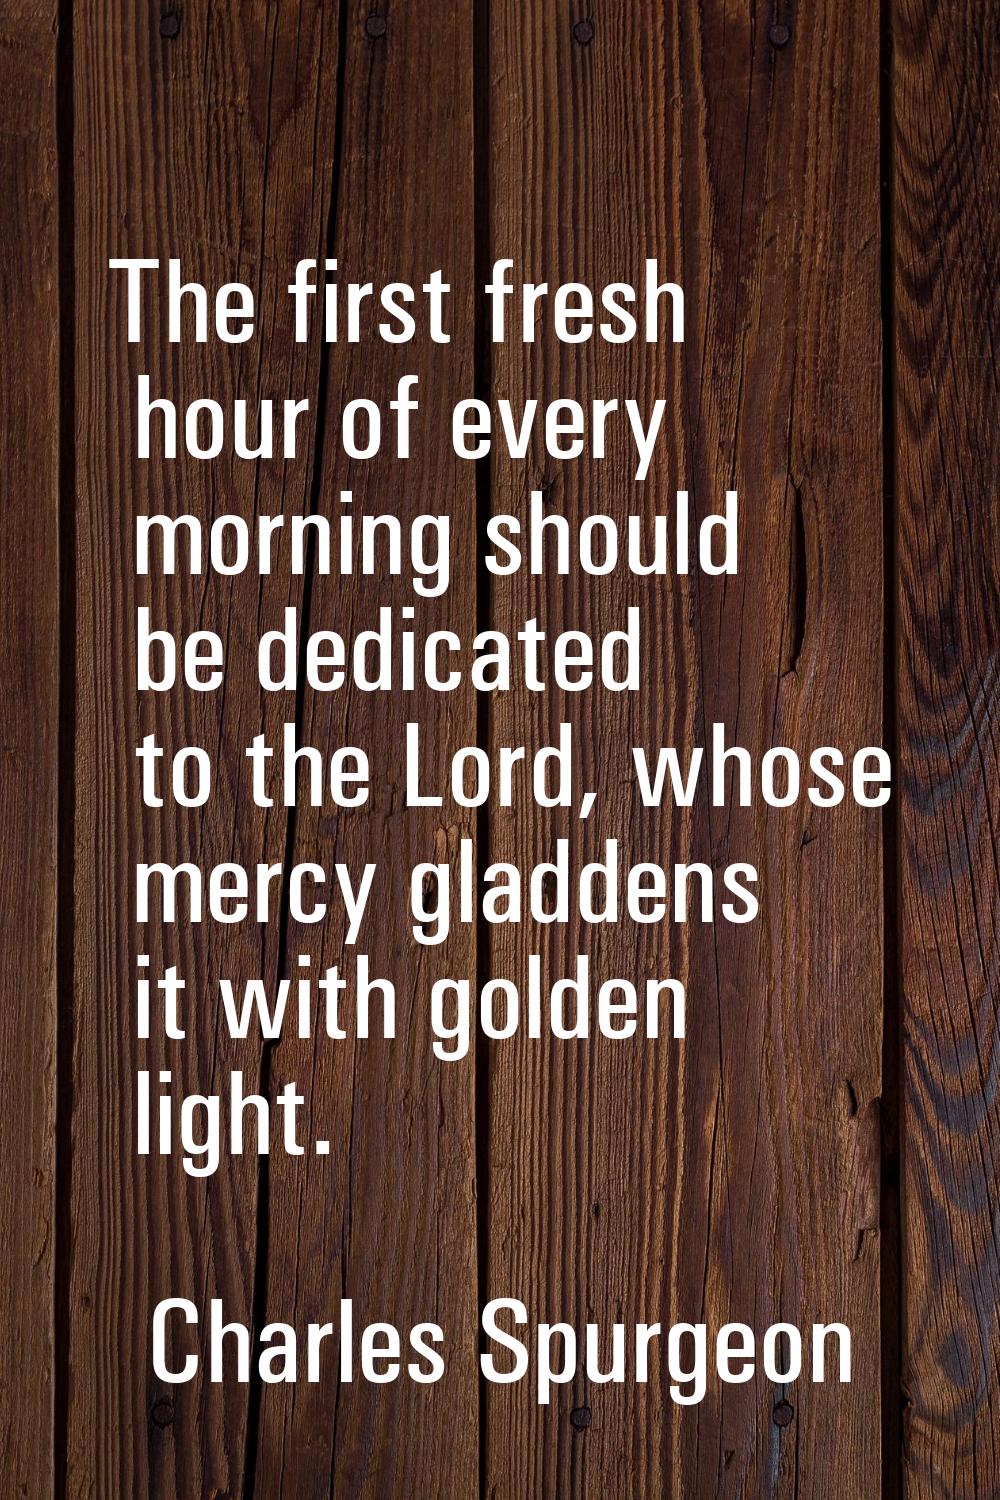 The first fresh hour of every morning should be dedicated to the Lord, whose mercy gladdens it with